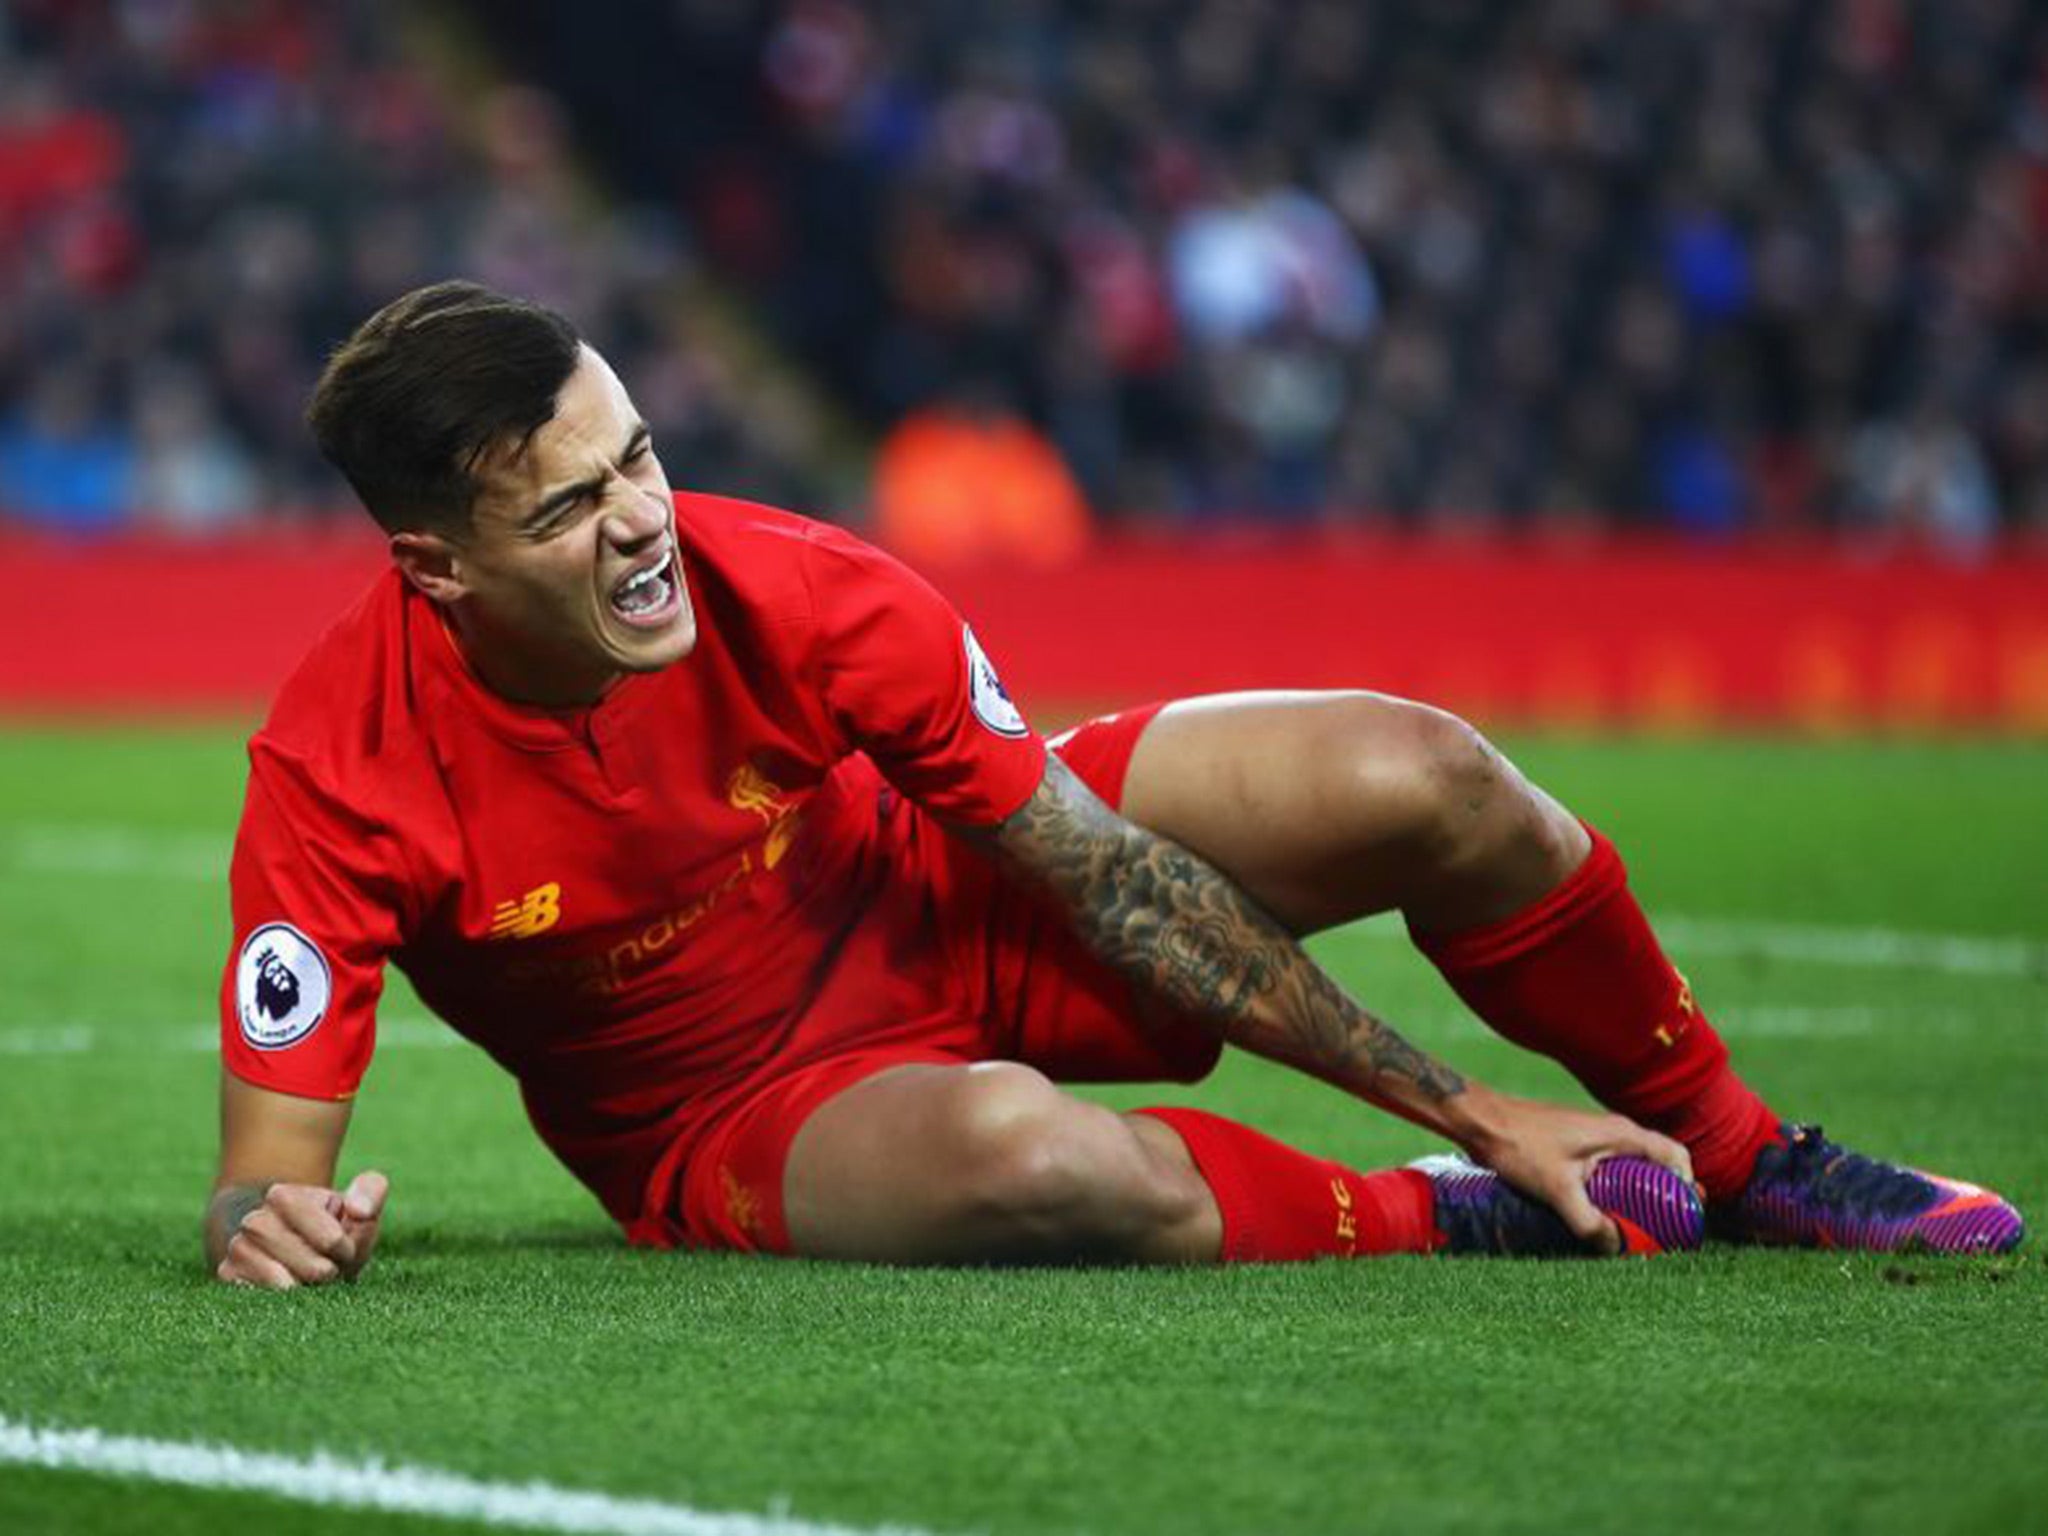 Coutinho was stretchered off and replaced by Divock Origi